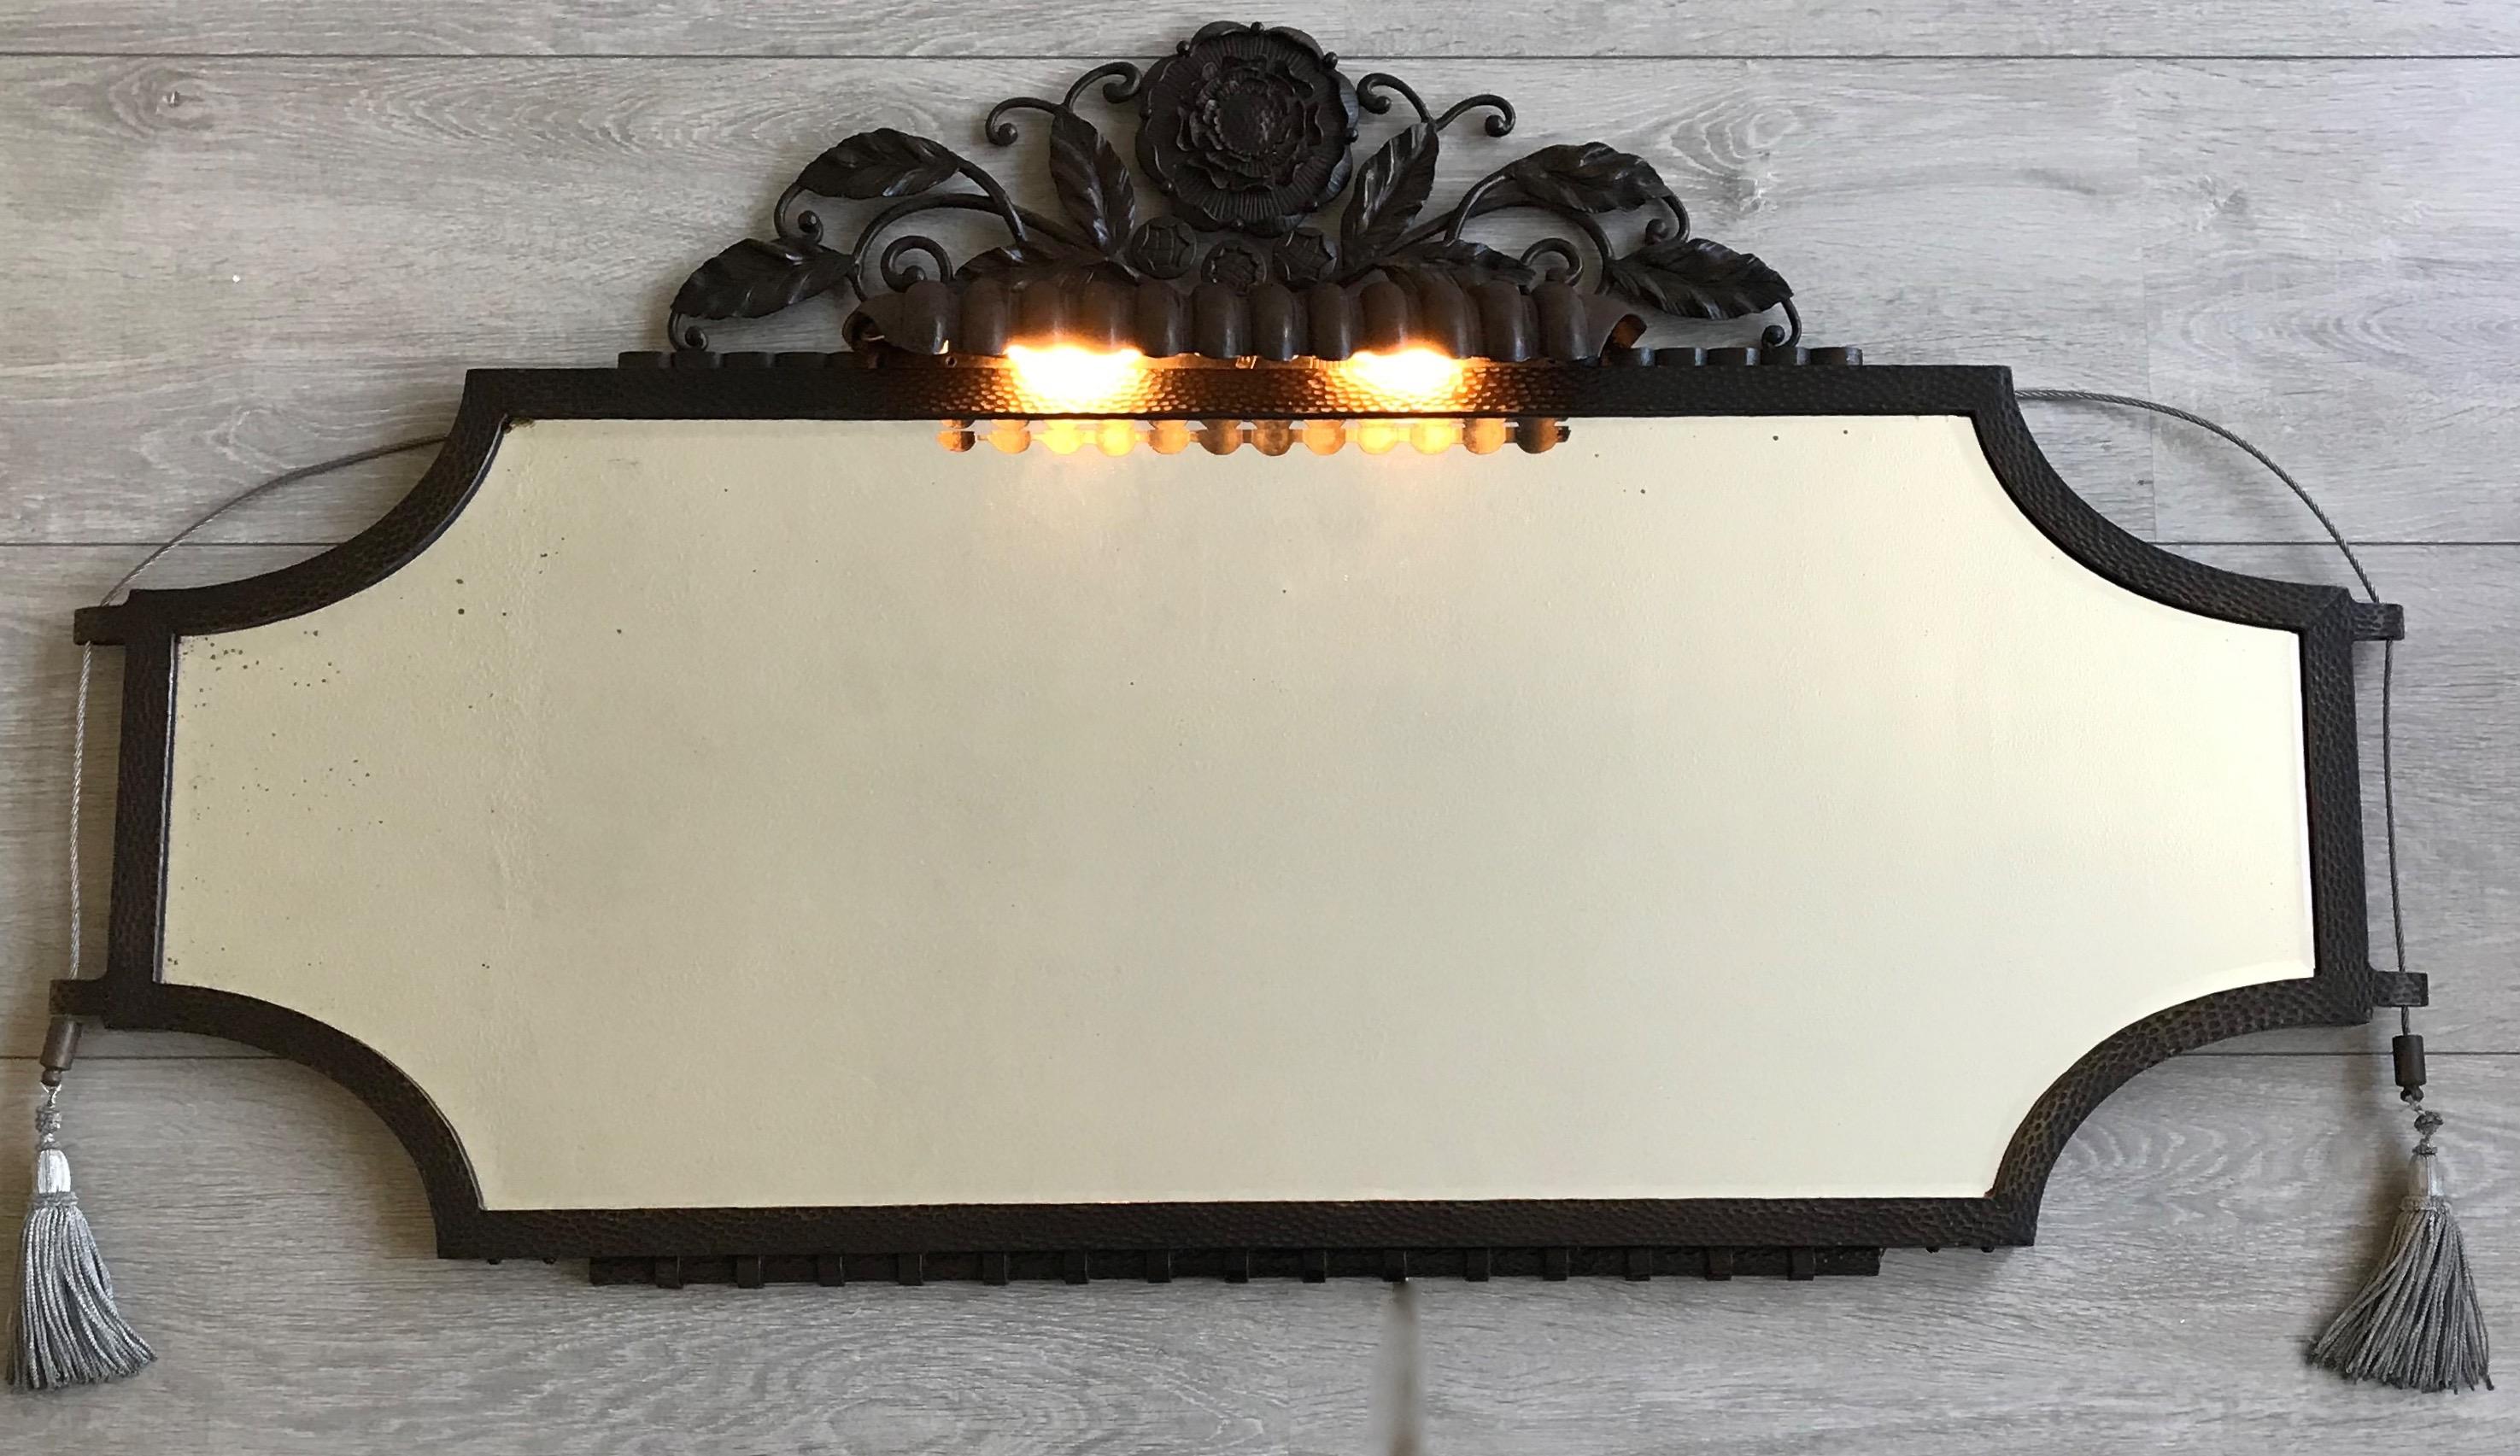 Rare and stunning Art Deco wall mirror, possibly by Edgar Brandt.

This striking Art Deco wall mirror is part of a stunning two-piece French Art Deco set consisting of a side table and this masterful wall mirror. This marvelous Art Deco mirror is in